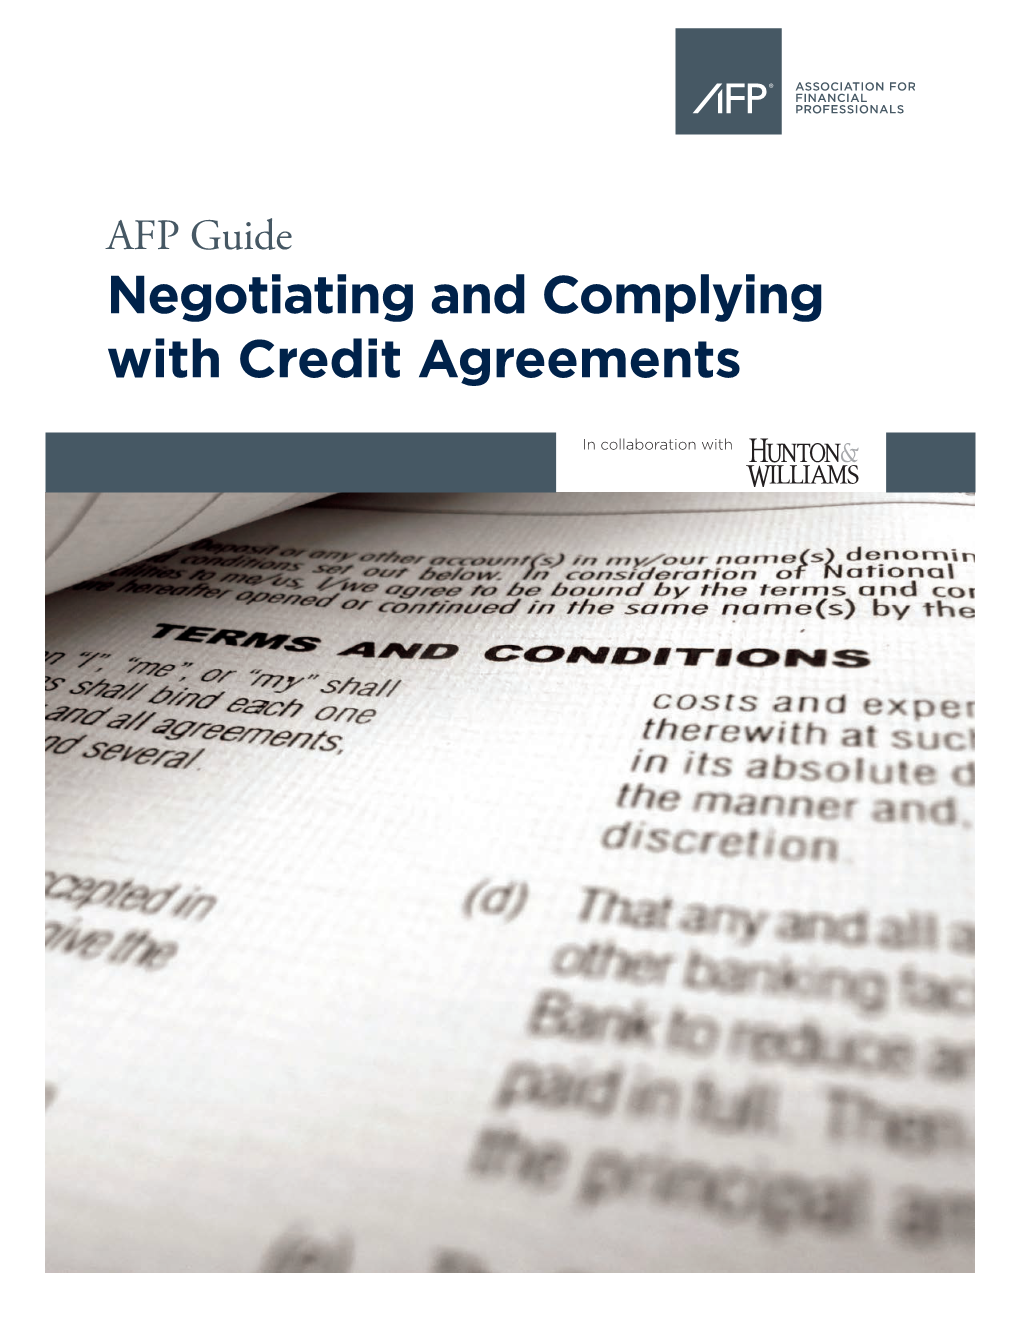 AFP Guide Negotiating and Complying with Credit Agreements